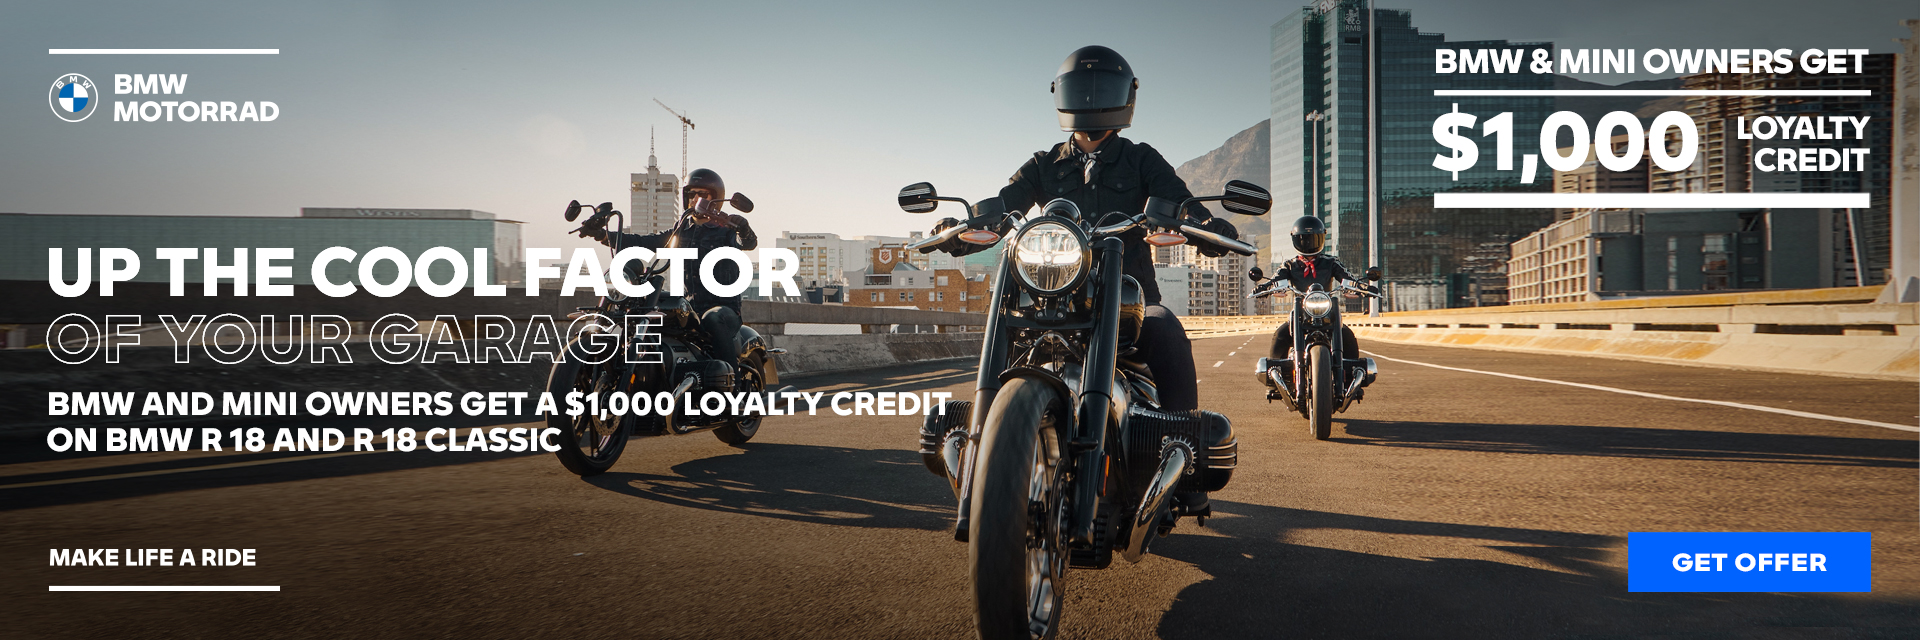 BMW Motorcycle Dealers Near Me Los Angeles Orange County Riverside | Southern California BMW